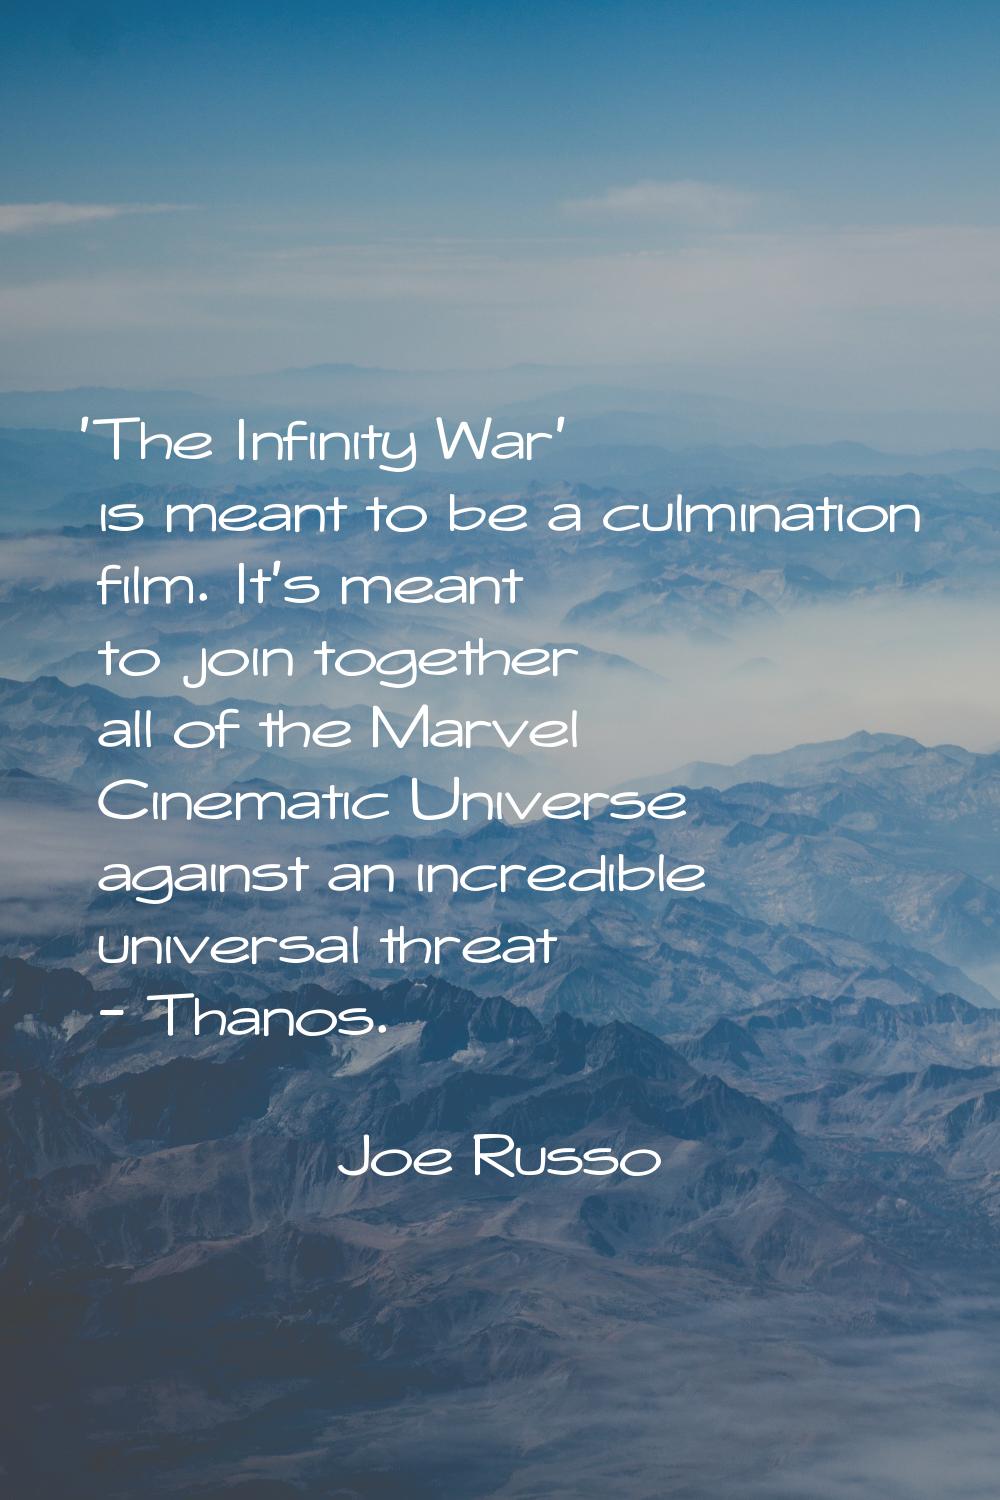 'The Infinity War' is meant to be a culmination film. It's meant to join together all of the Marvel